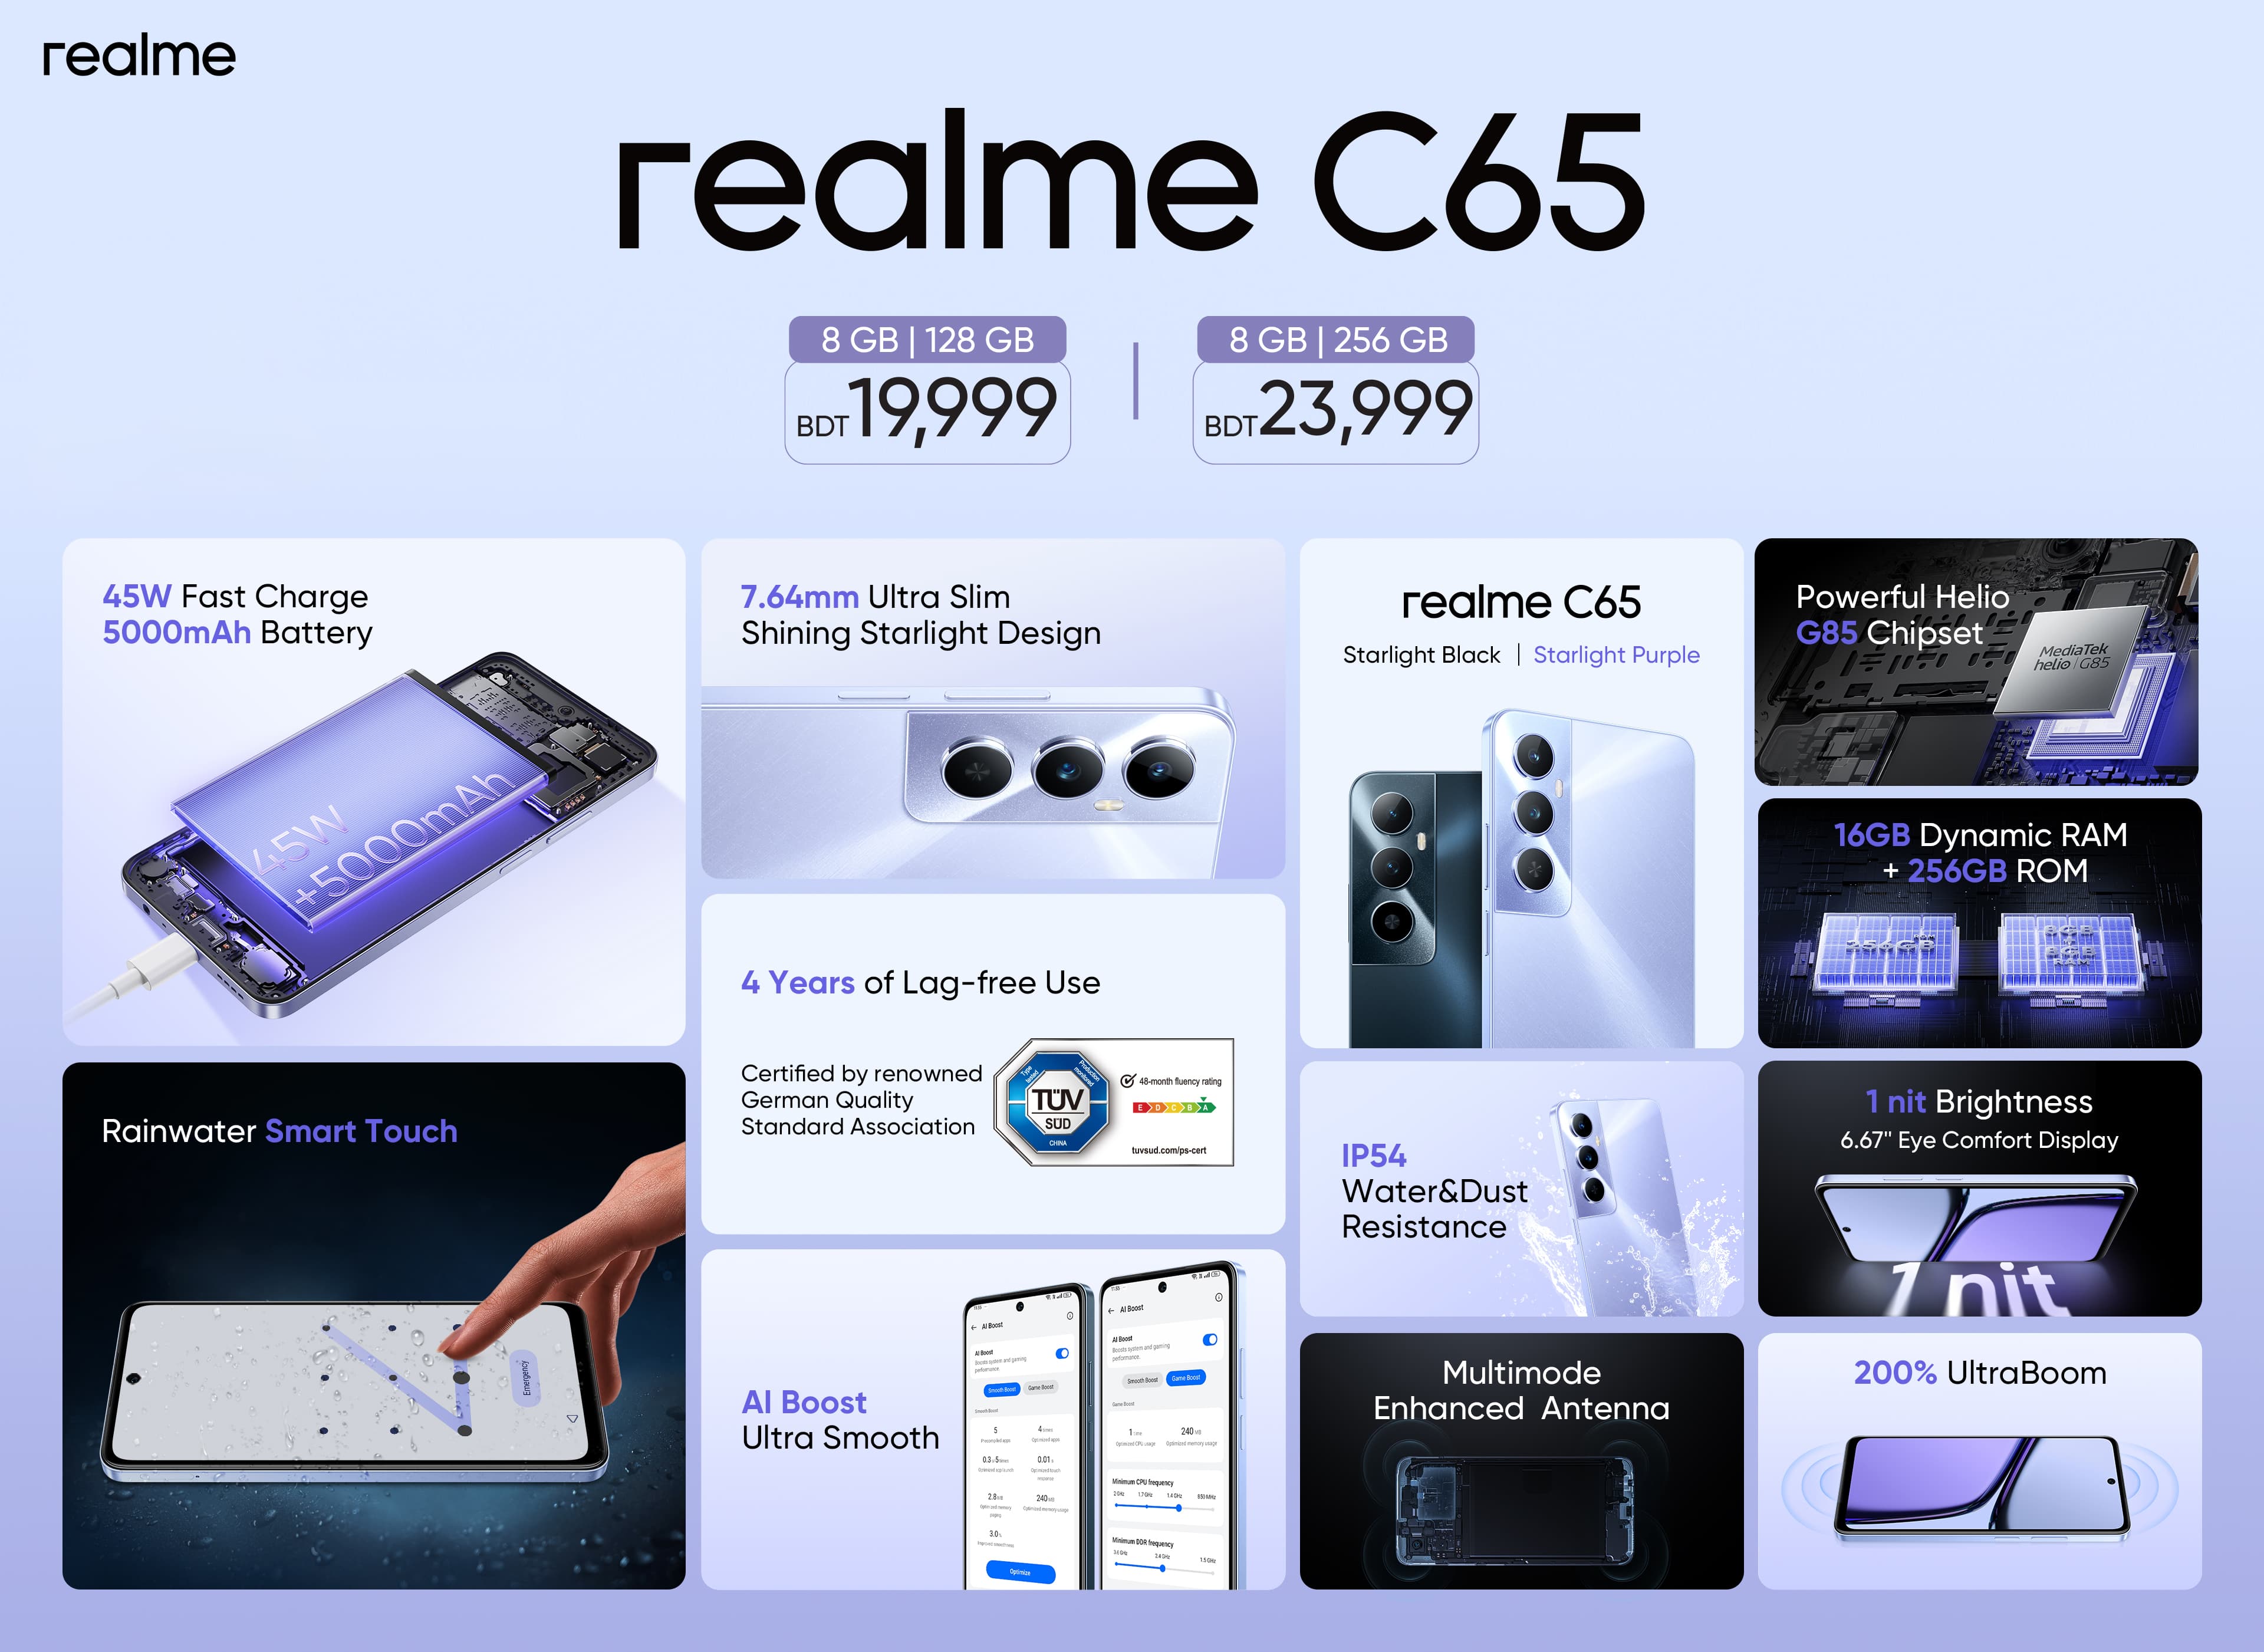 realme C65: All essential features with 4-year lag-free performance